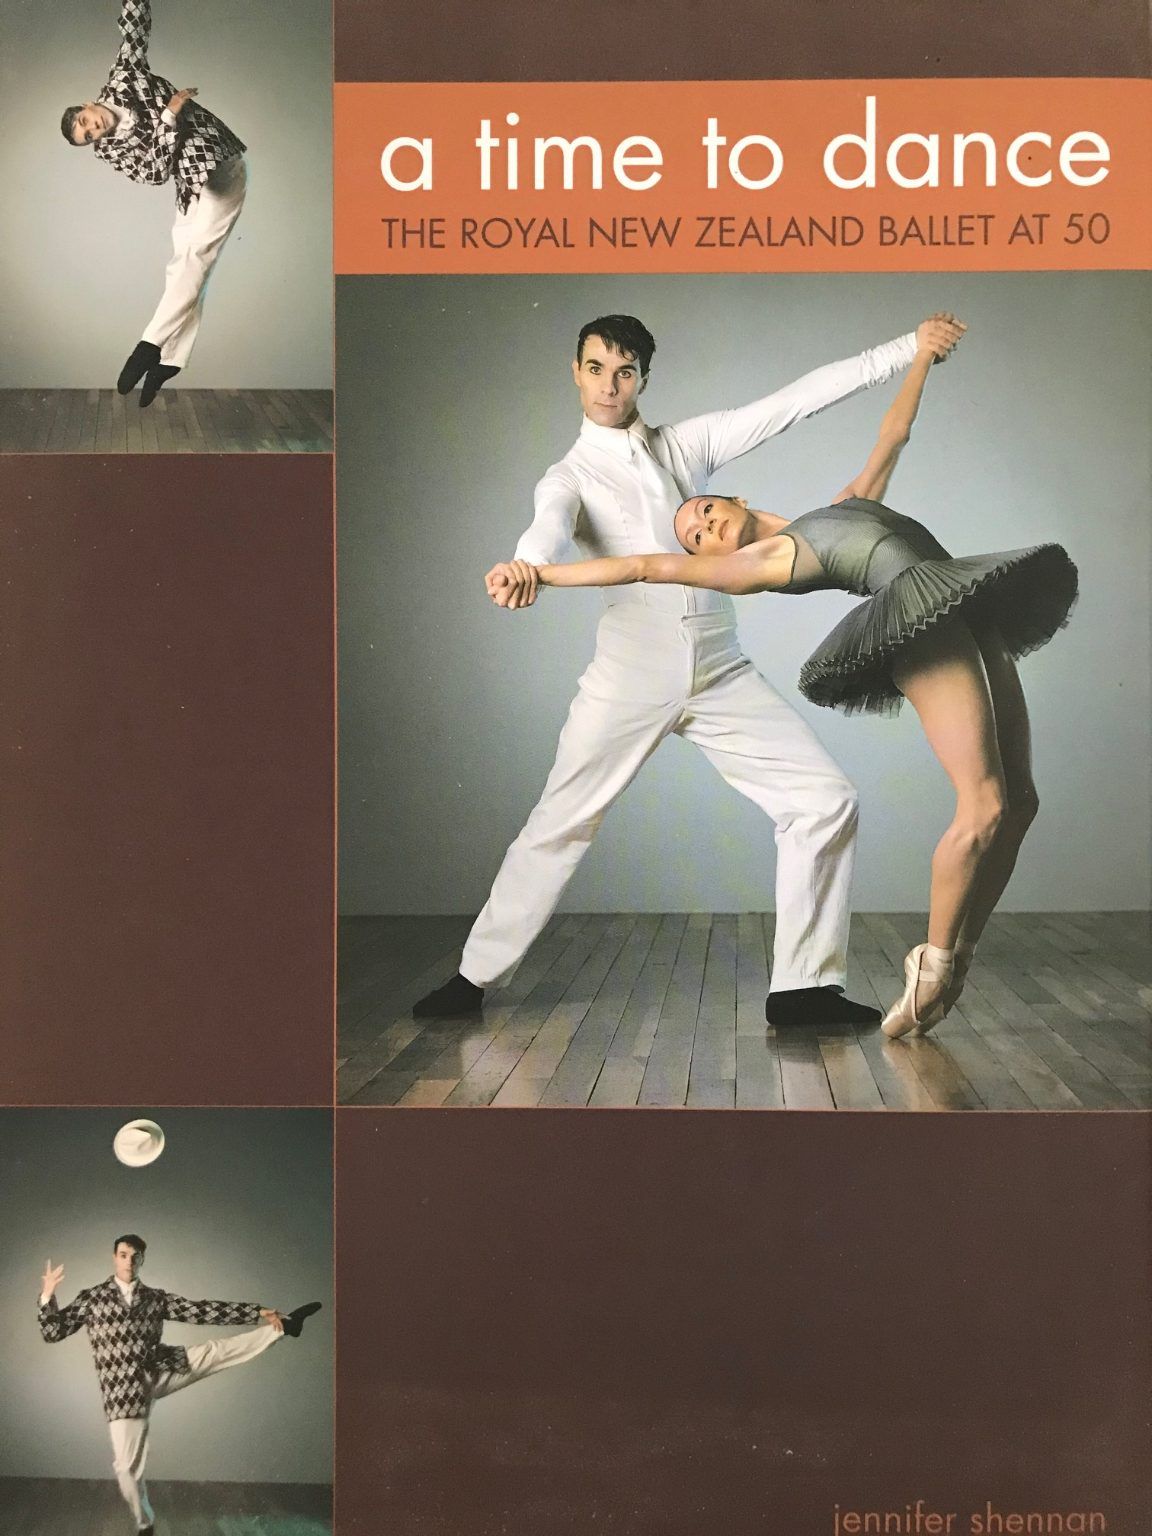 A TIME TO DANCE: The Royal New Zealand Ballet at 50